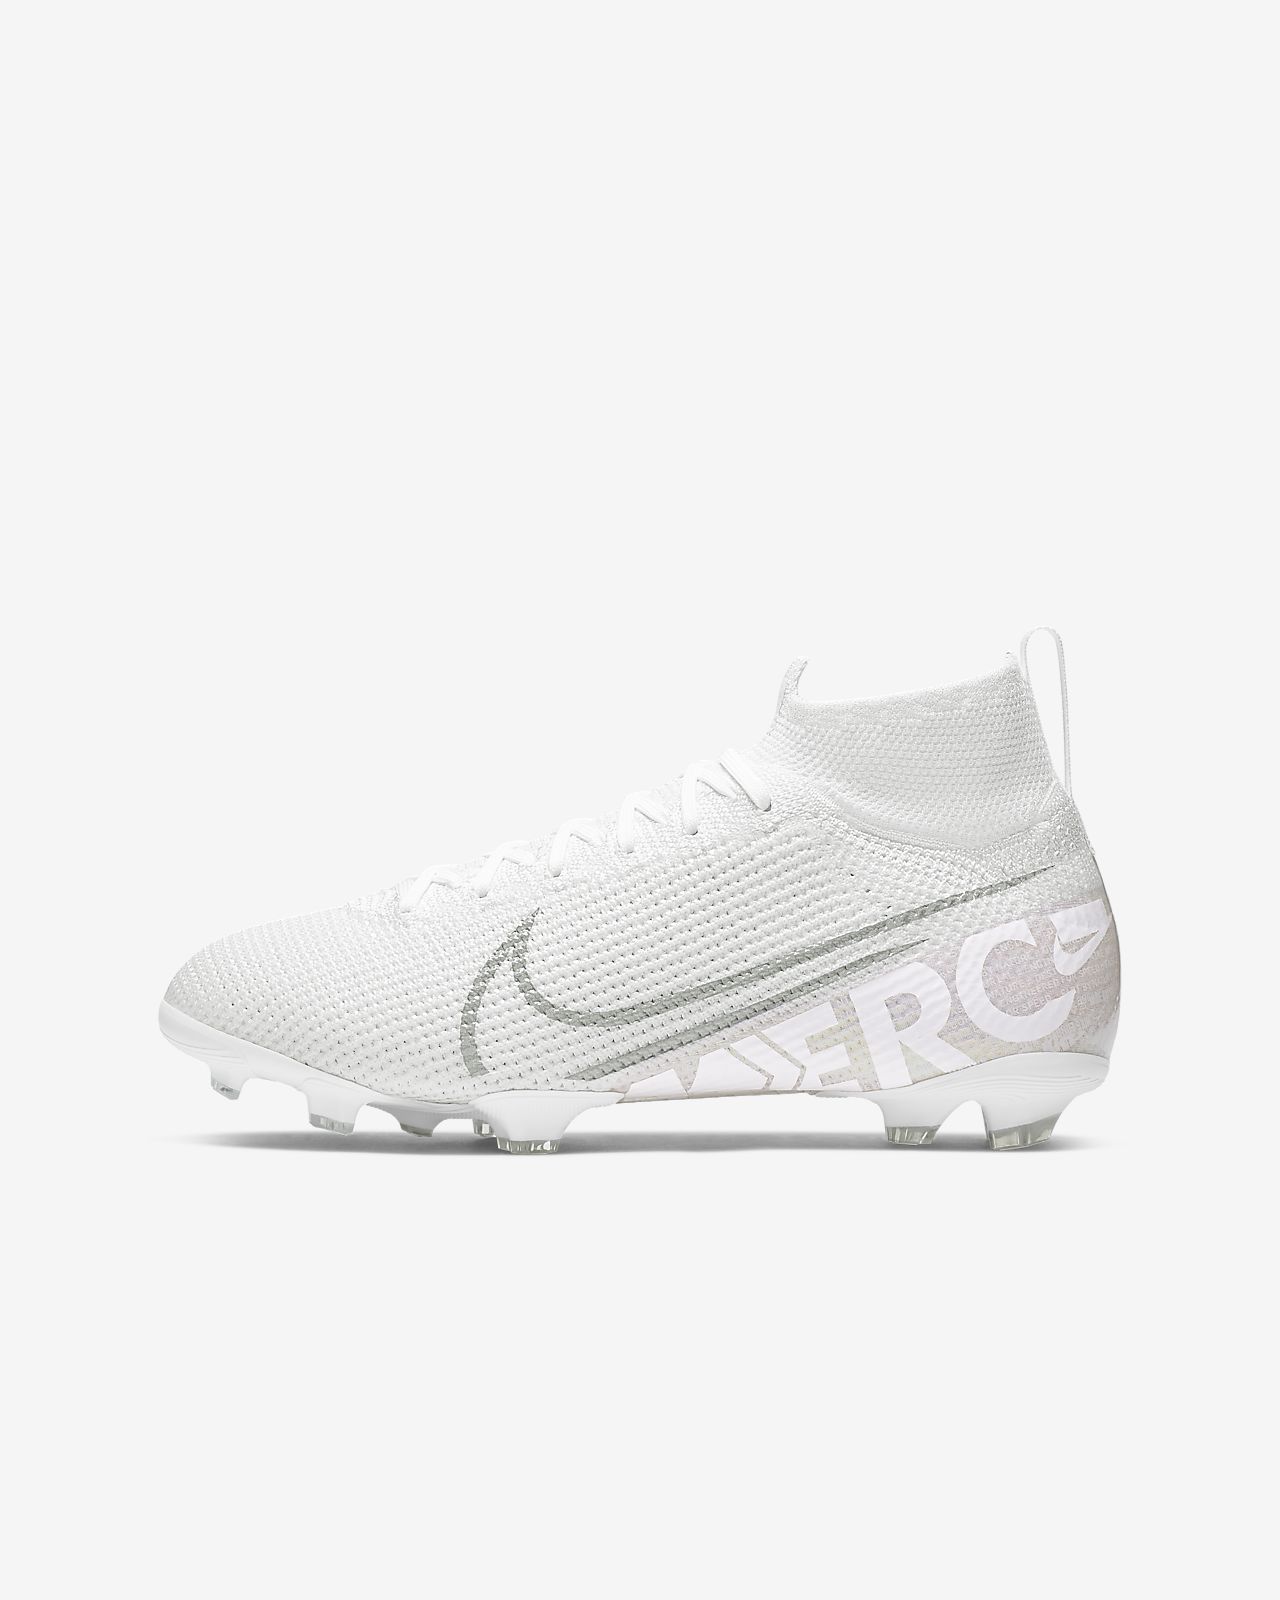 Nike Mercurial Superfly V CR7 AG PRO Wolf Grey Artificial